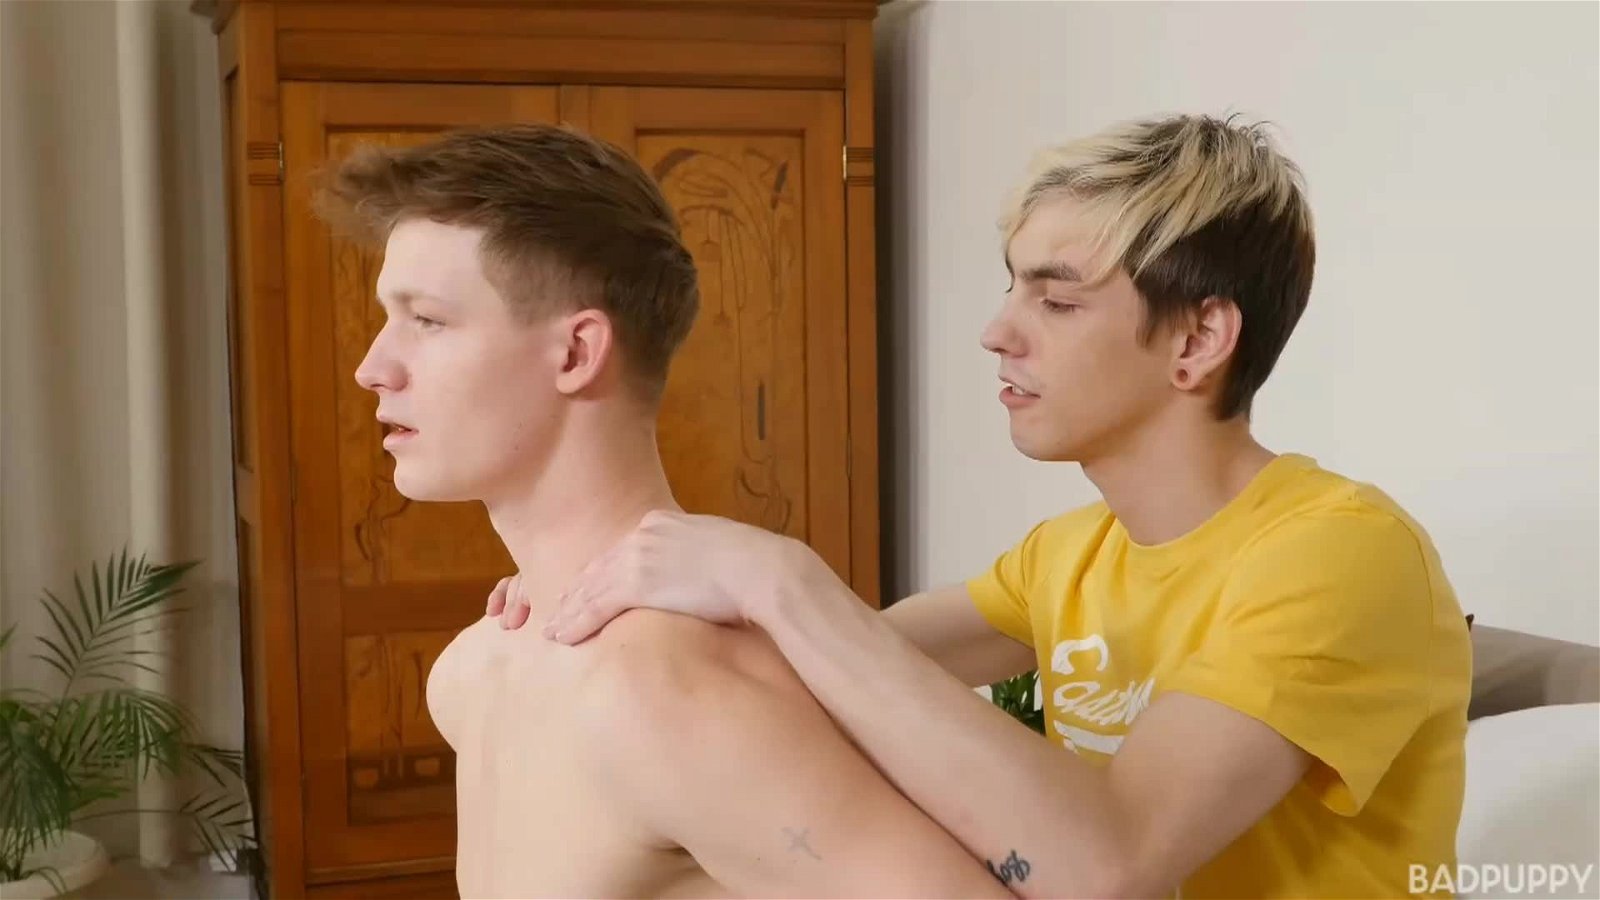 Watch the Video by BadpuppyOfficial with the username @BadpuppyOfficial, who is a brand user, posted on March 12, 2024. The post is about the topic Gay Porn. and the text says 'Beno uses his tongue and his hand on Antony’s massive, uncut cock
https://www.badpuppy.com/tour/trailers/Beno-and-Antony.html
#fitlads #gayfit #gay #gaytwinks #muscles #twink #hunk #jock #uncut #helpinghand'